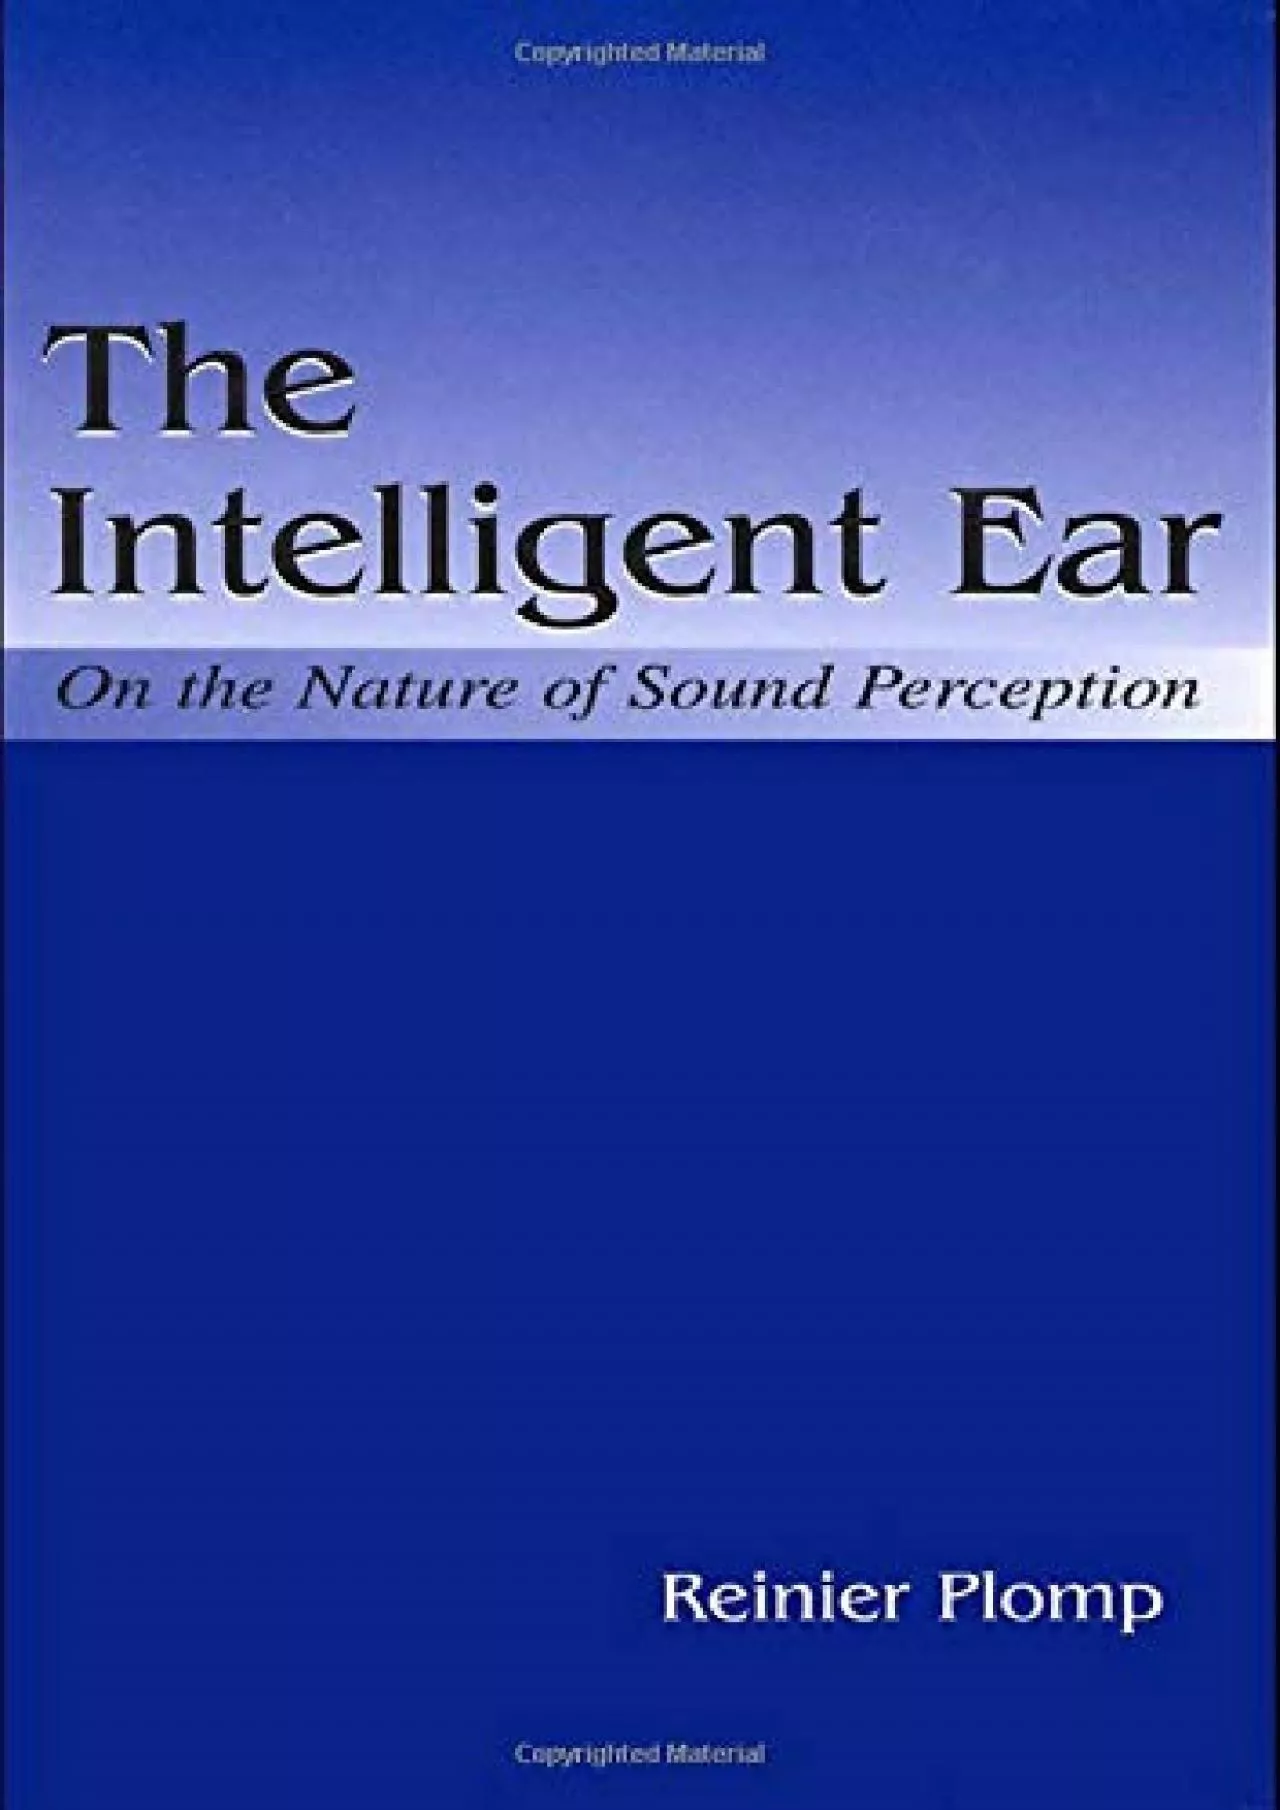 (BOOK)-The Intelligent Ear: On the Nature of Sound Perception